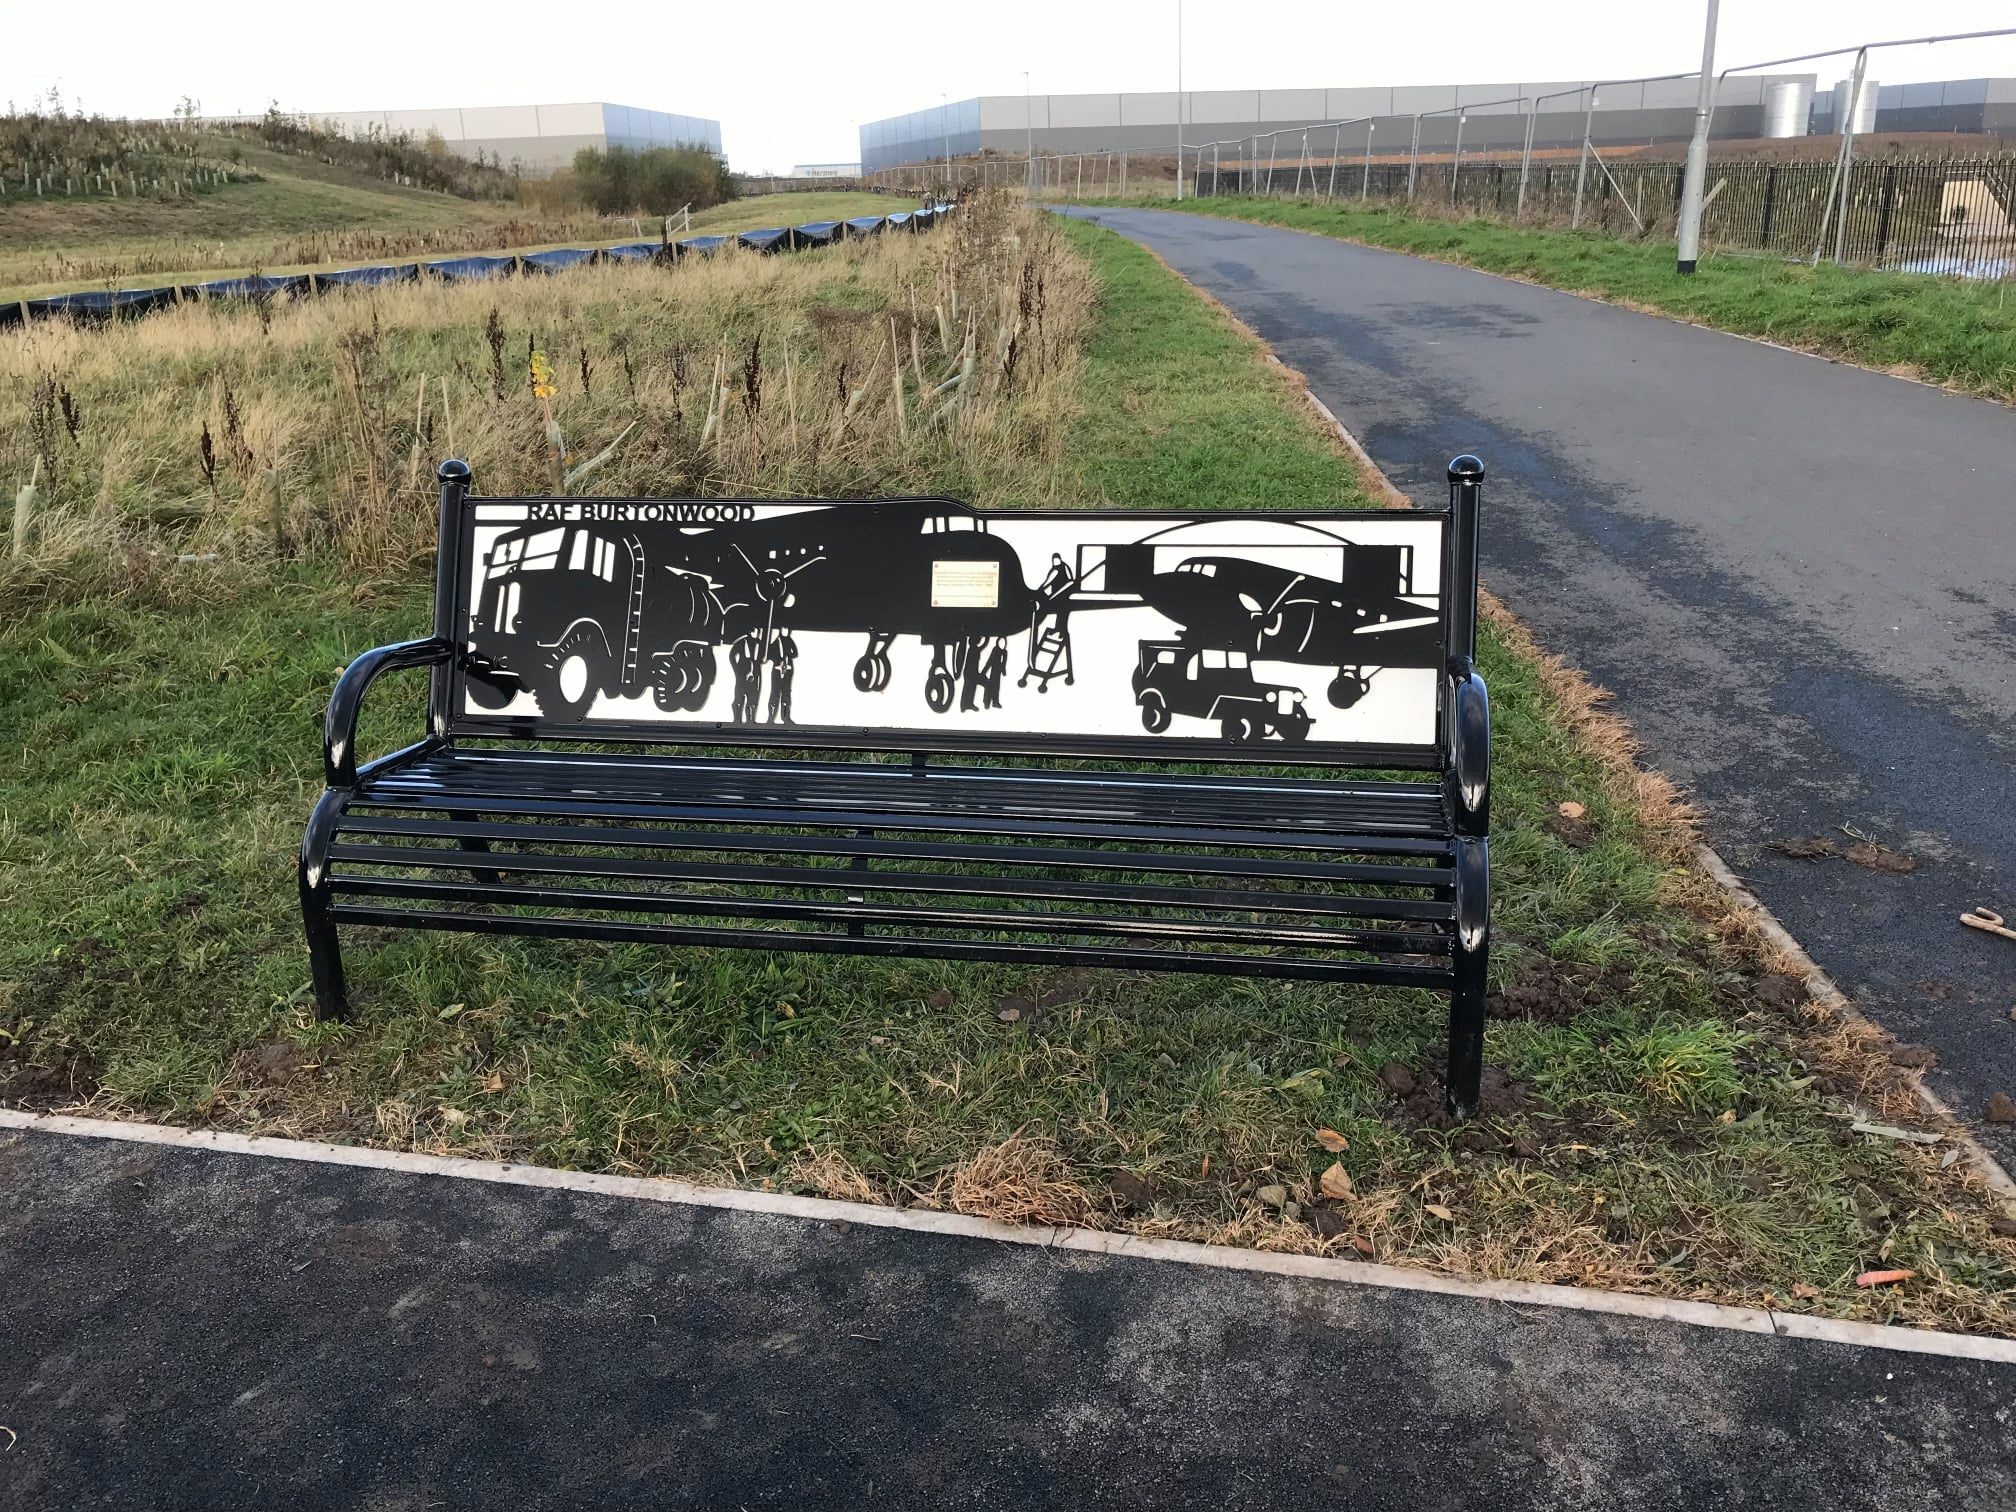 New bench at Airlift Hill